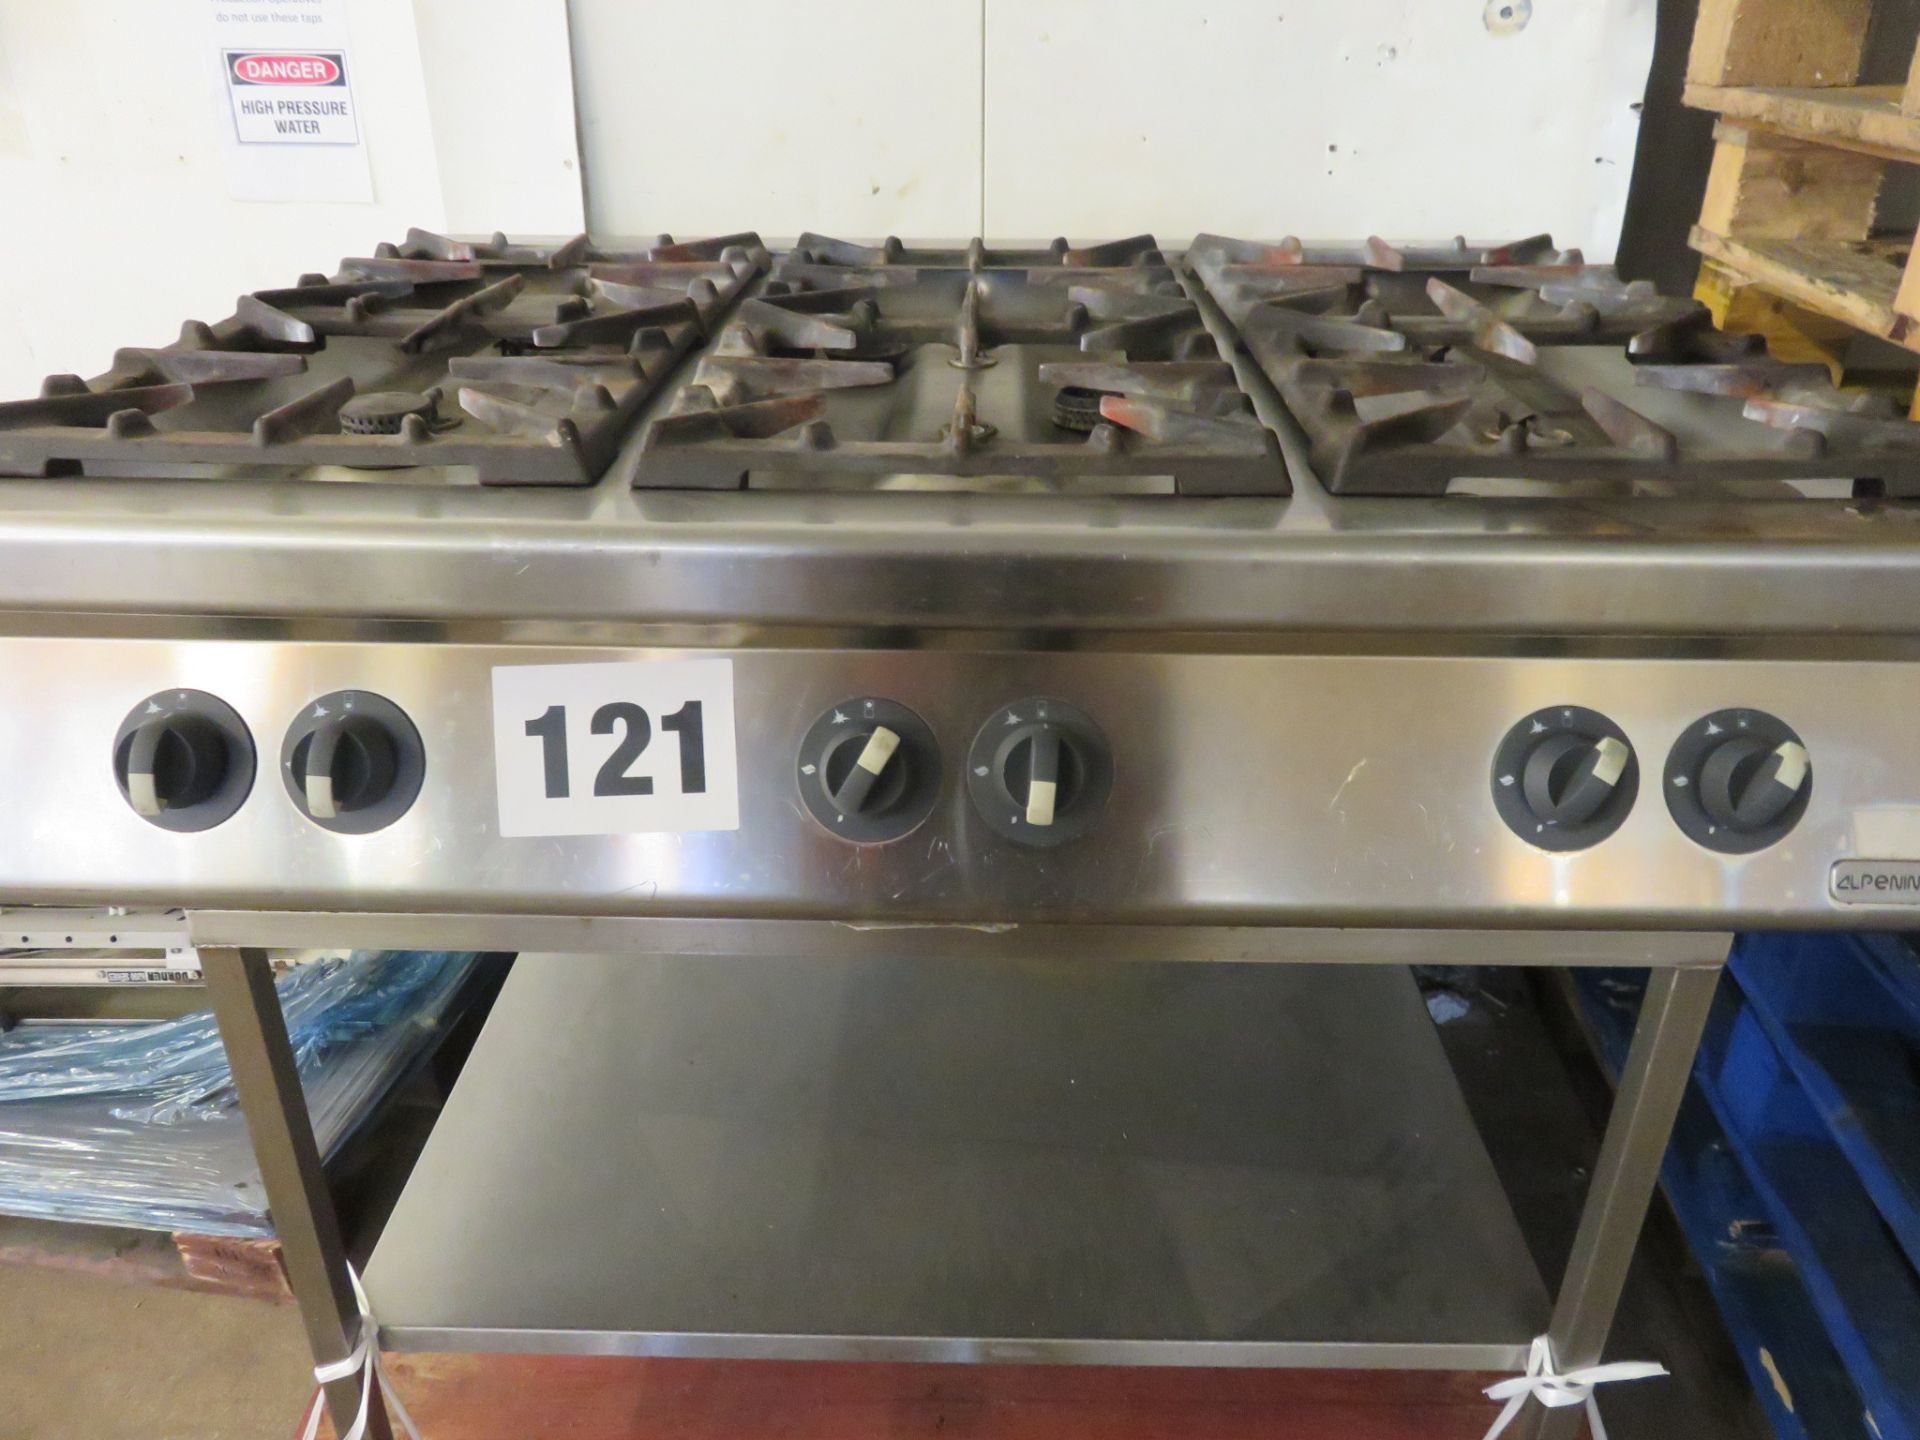 6 ring gas Cooker S/s with shelf by Penino. Lift out £40